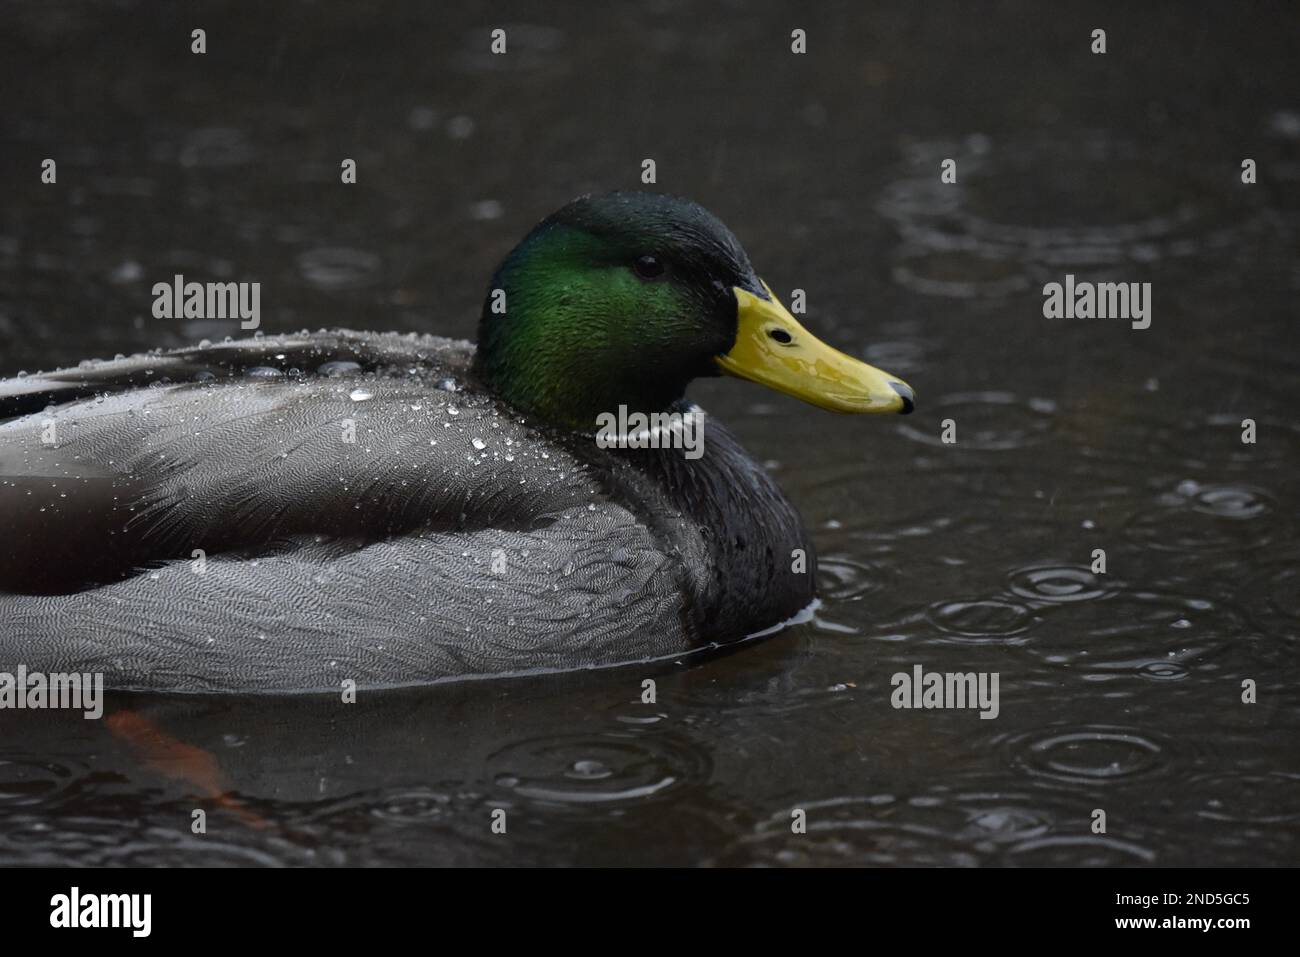 Close-Up Right-Profile Image of a Drake Mallard Duck (Anas platyrhynchos) Swimming into View Covered in Rain Droplets with Rain Droplets on Lake, UK Stock Photo